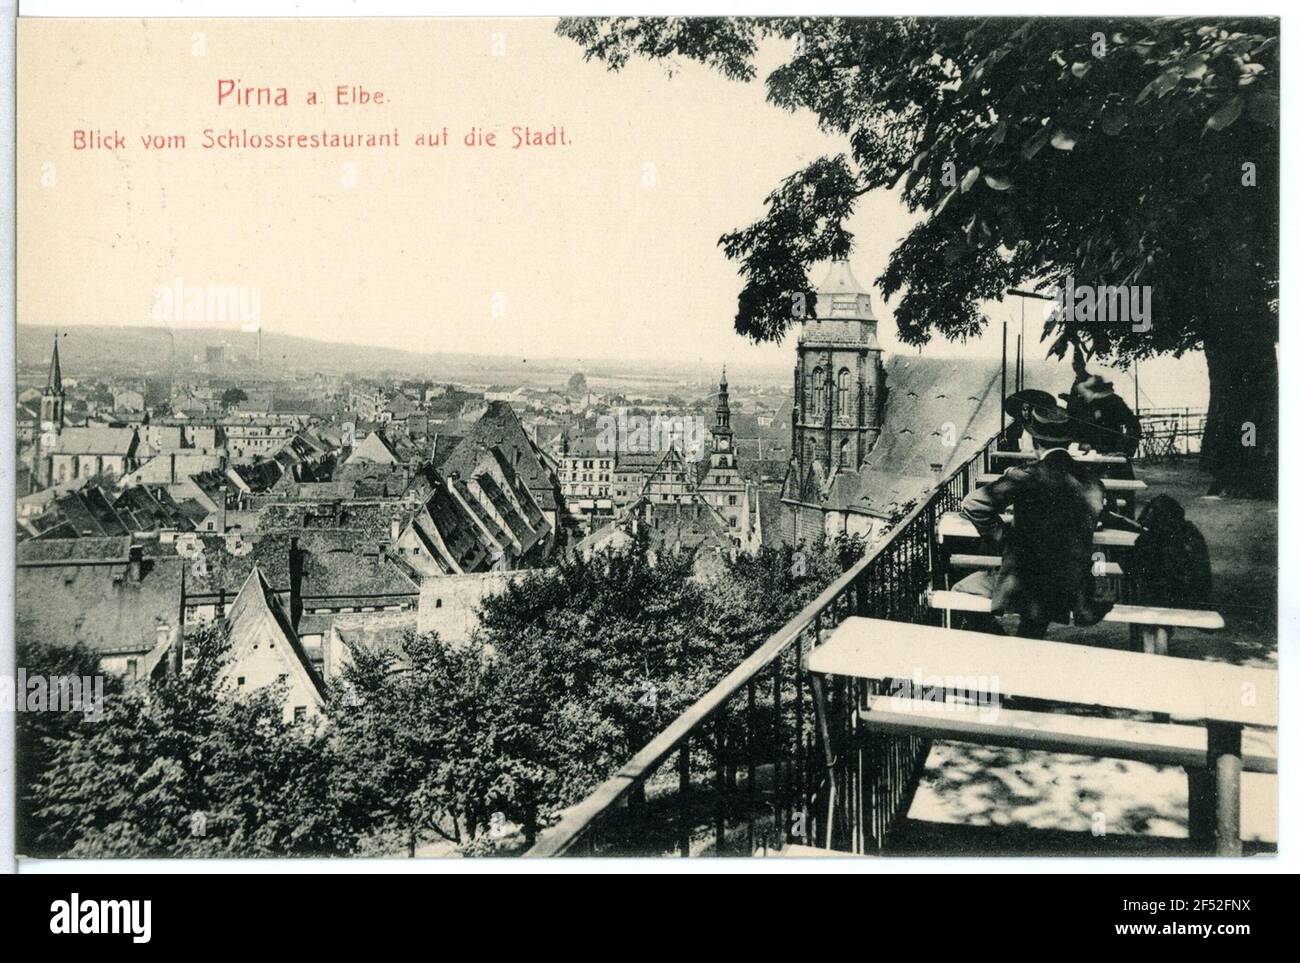 View from the Schloßrestaurant on the city Pirna. View from the castle restaurant on the city Stock Photo